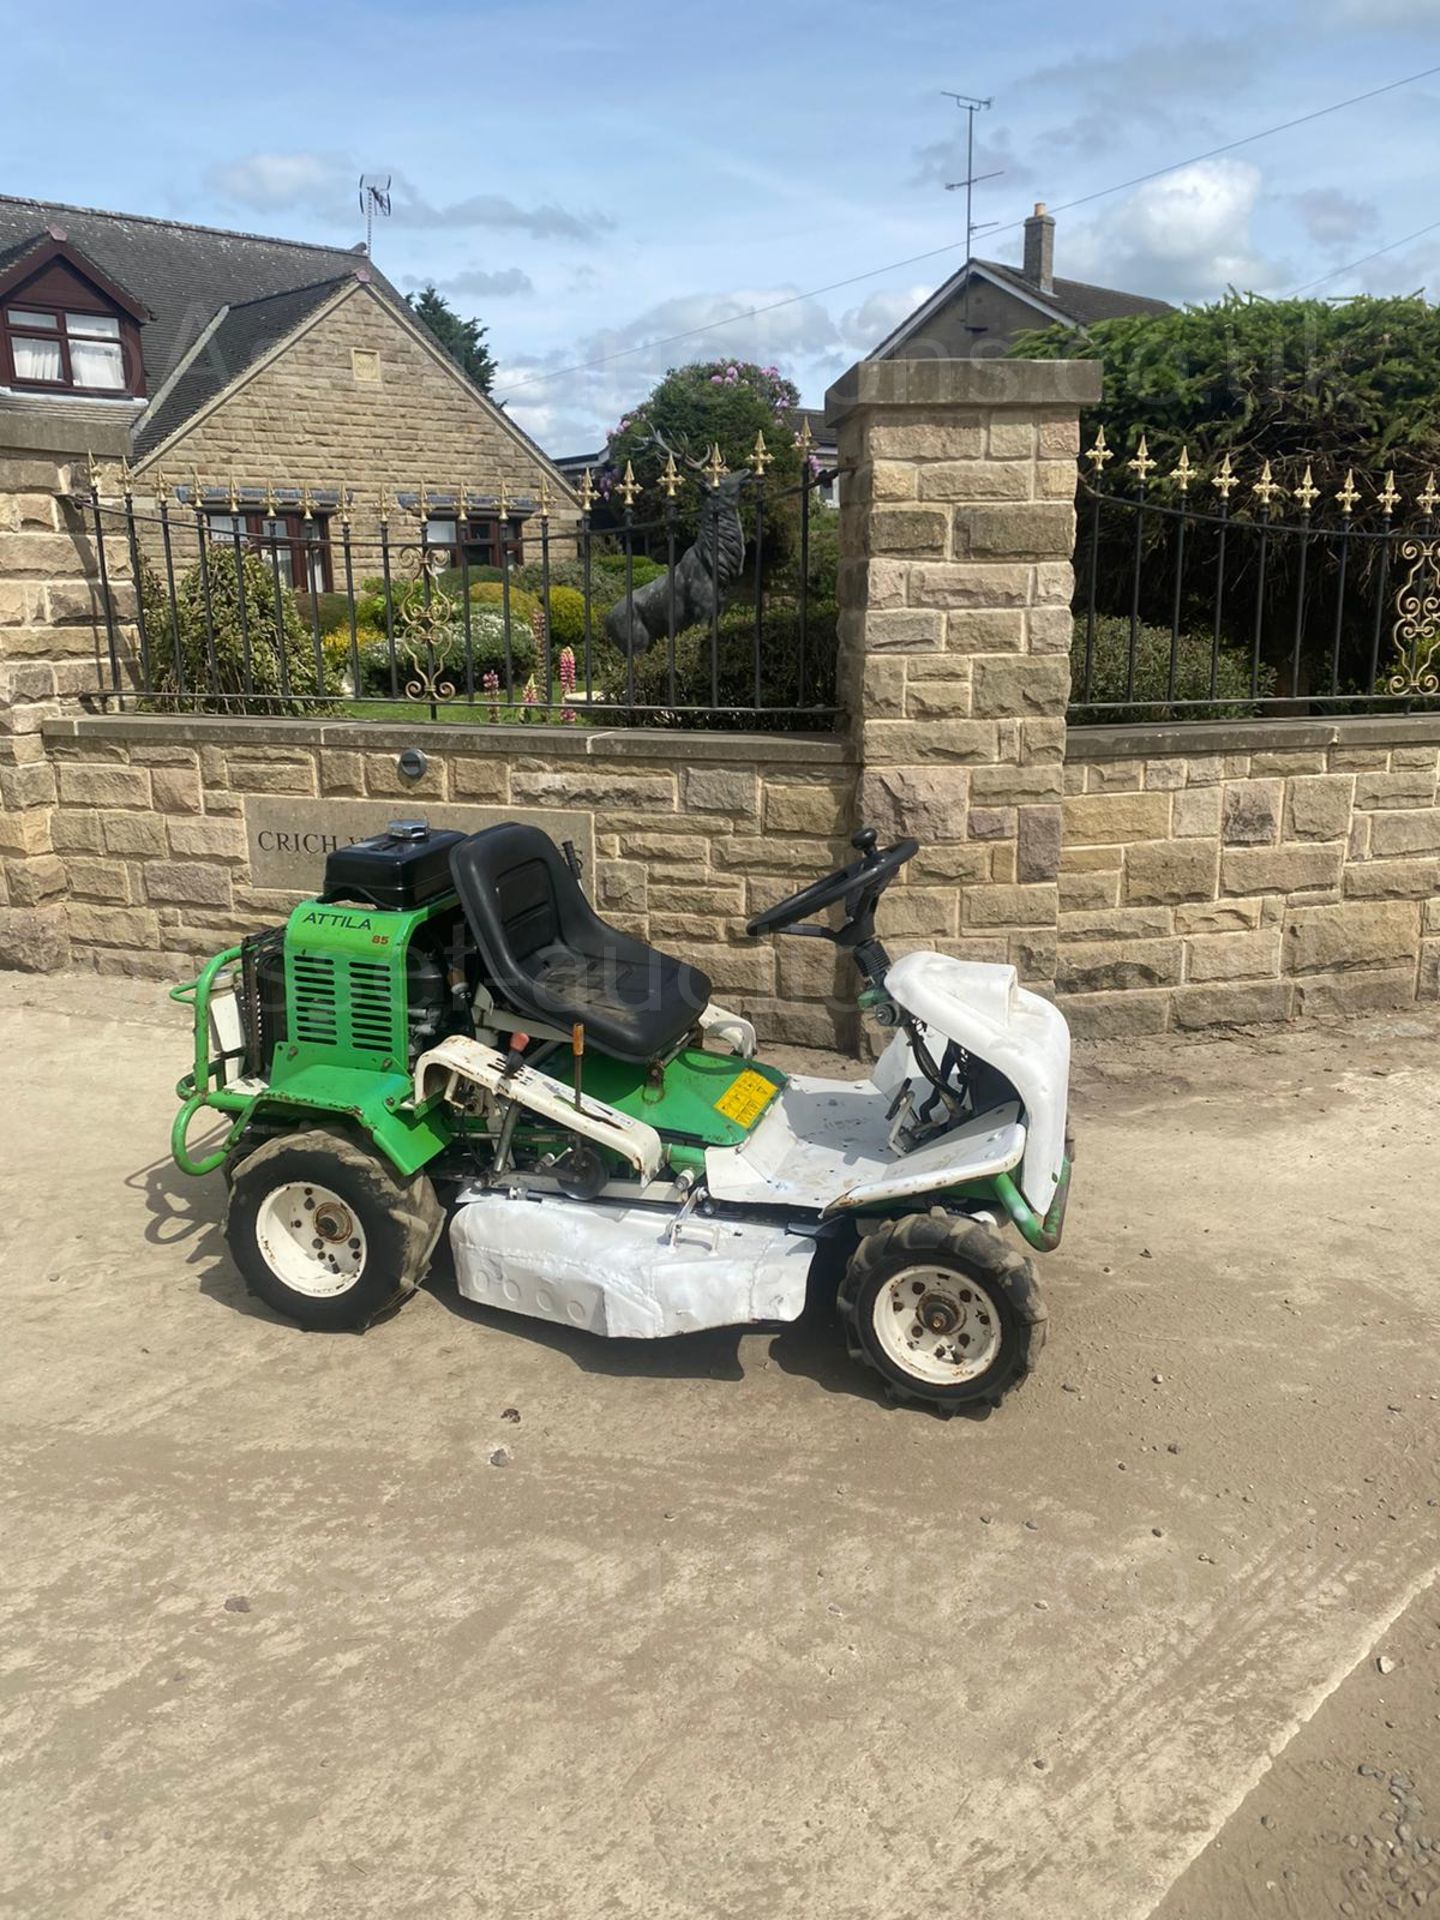 ETESIA ATTILA 85 BANK MOWER, STARTS AND RUNS, HOURS ARE SHOWING 554 *NO VAT* - Image 2 of 12